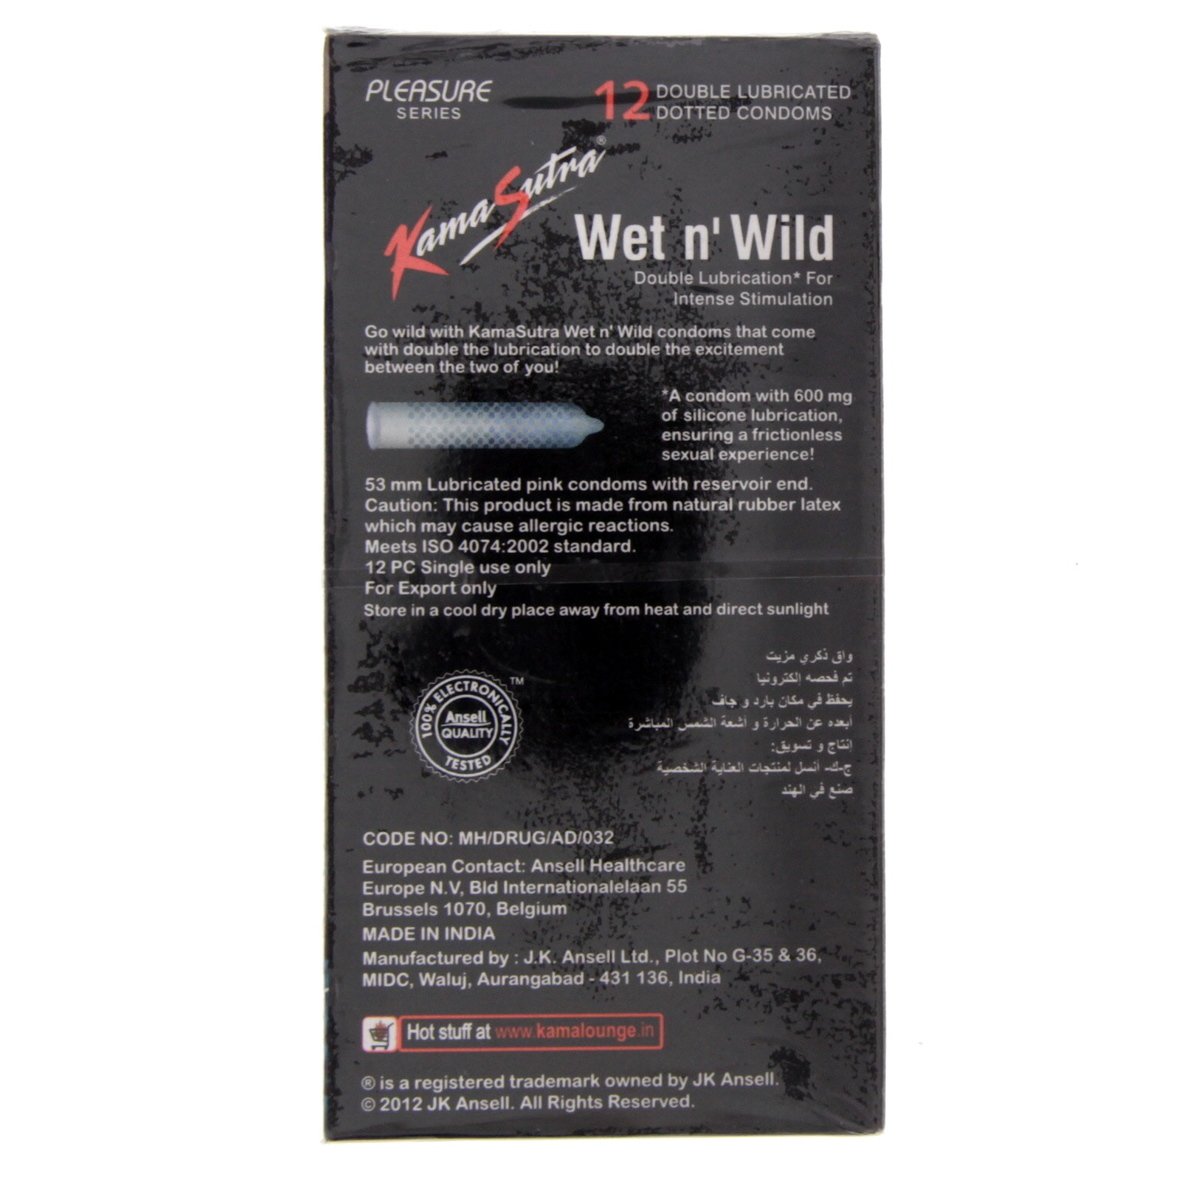 Kamasutra Wet n' Wild Double Lubricated Dotted Condoms 12 pcs